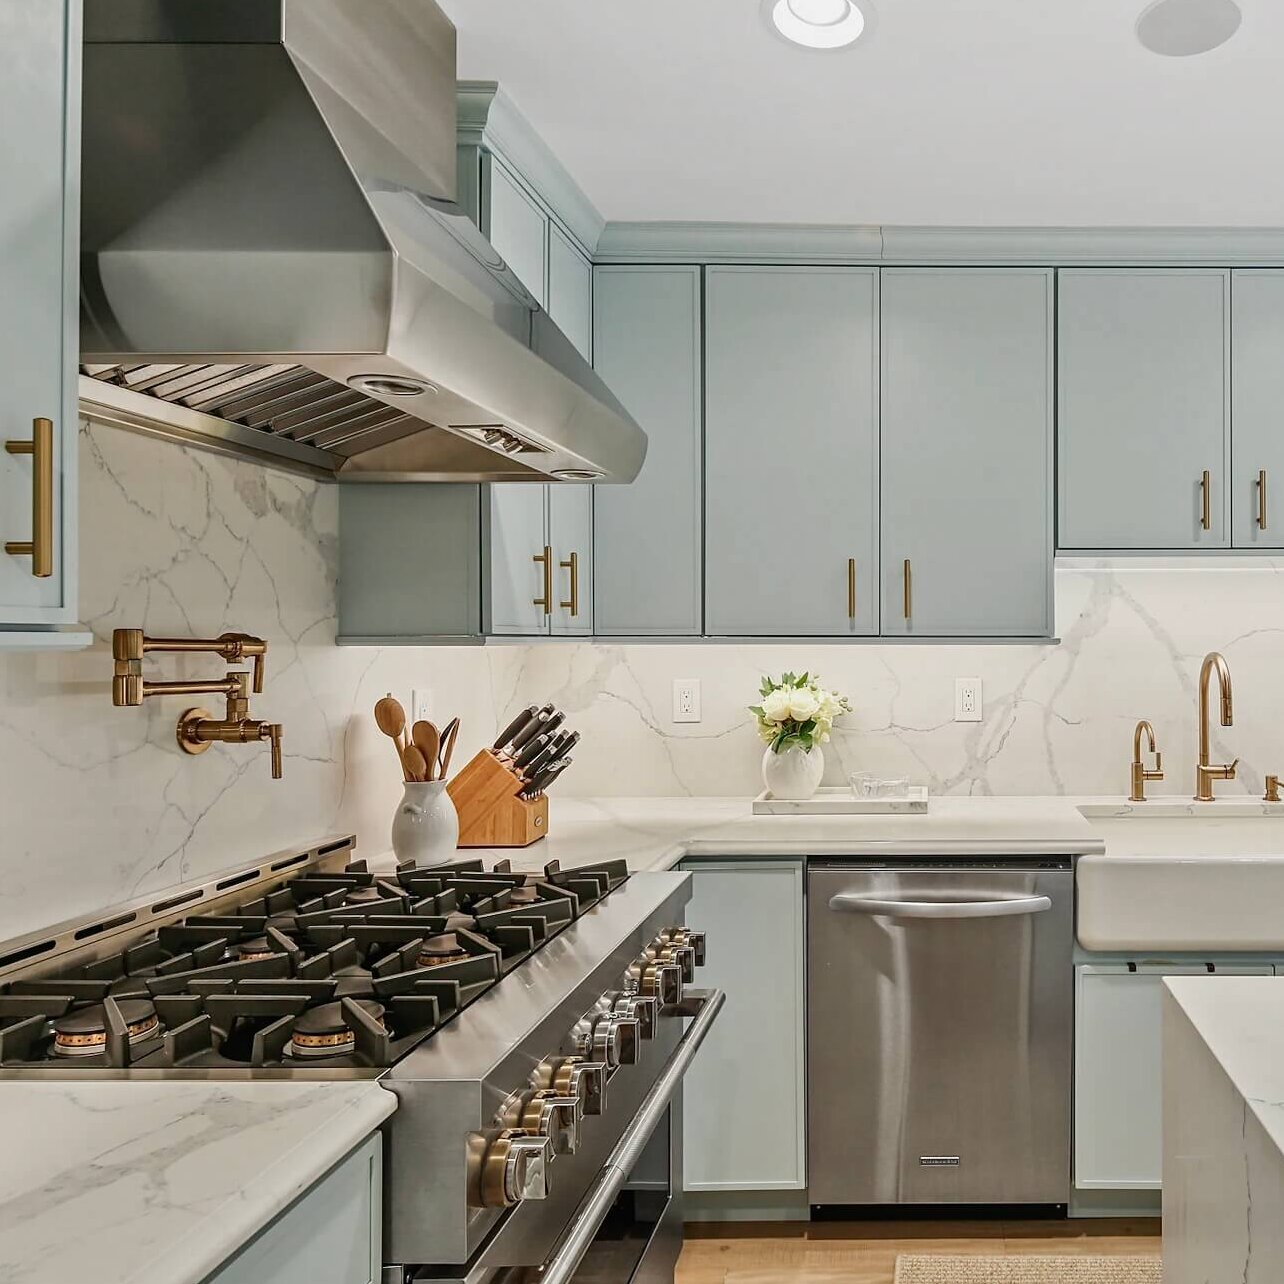 A new kitchen with modern shaker doors in a soft pale blue paint color and mixed metal finsihes.